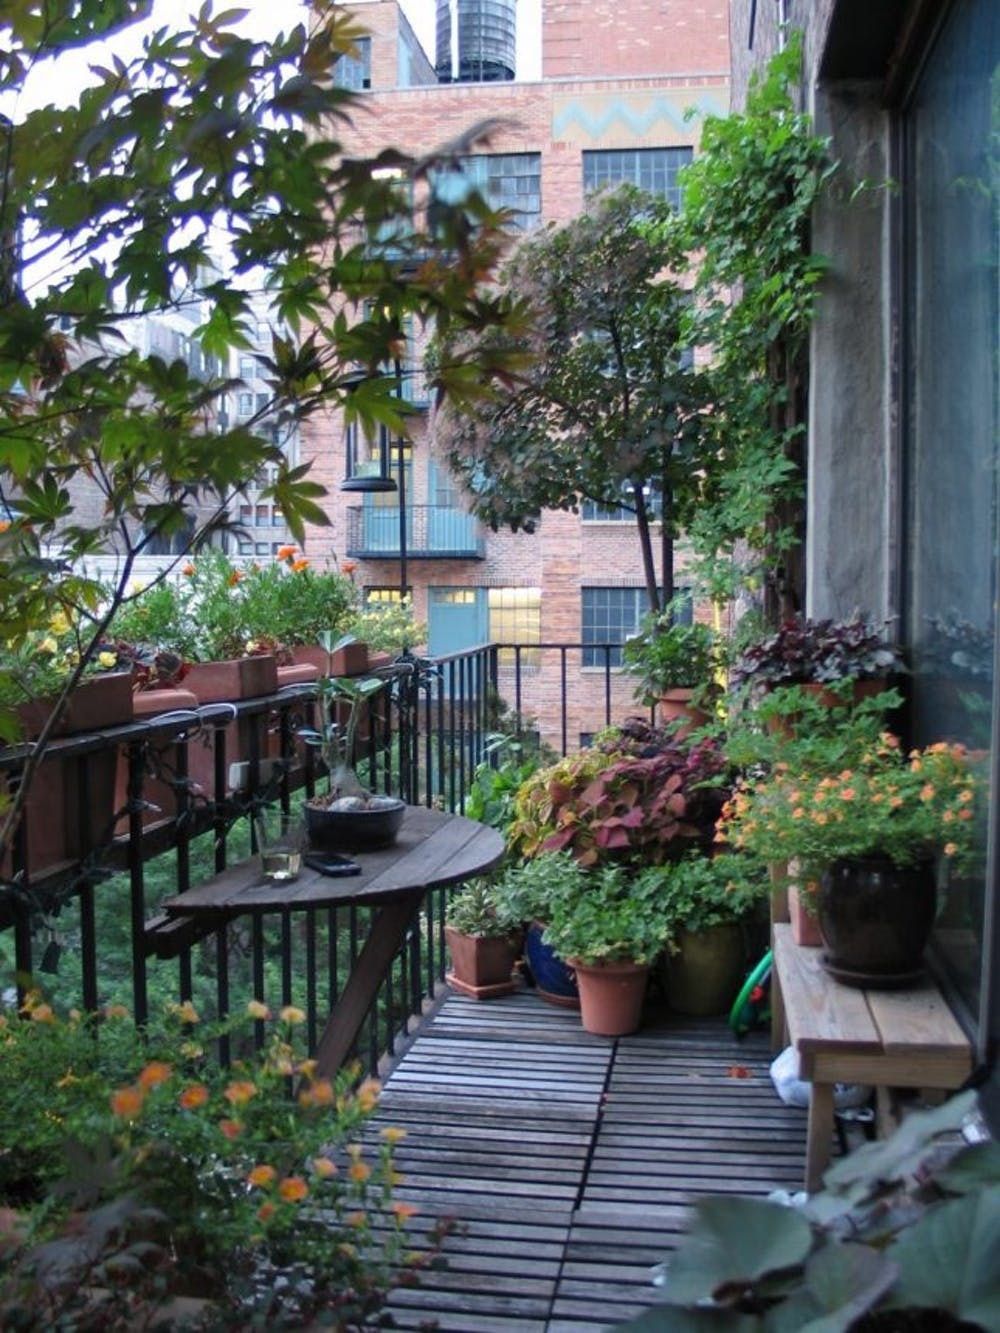 Balcony with Colorful Flowers and Trees